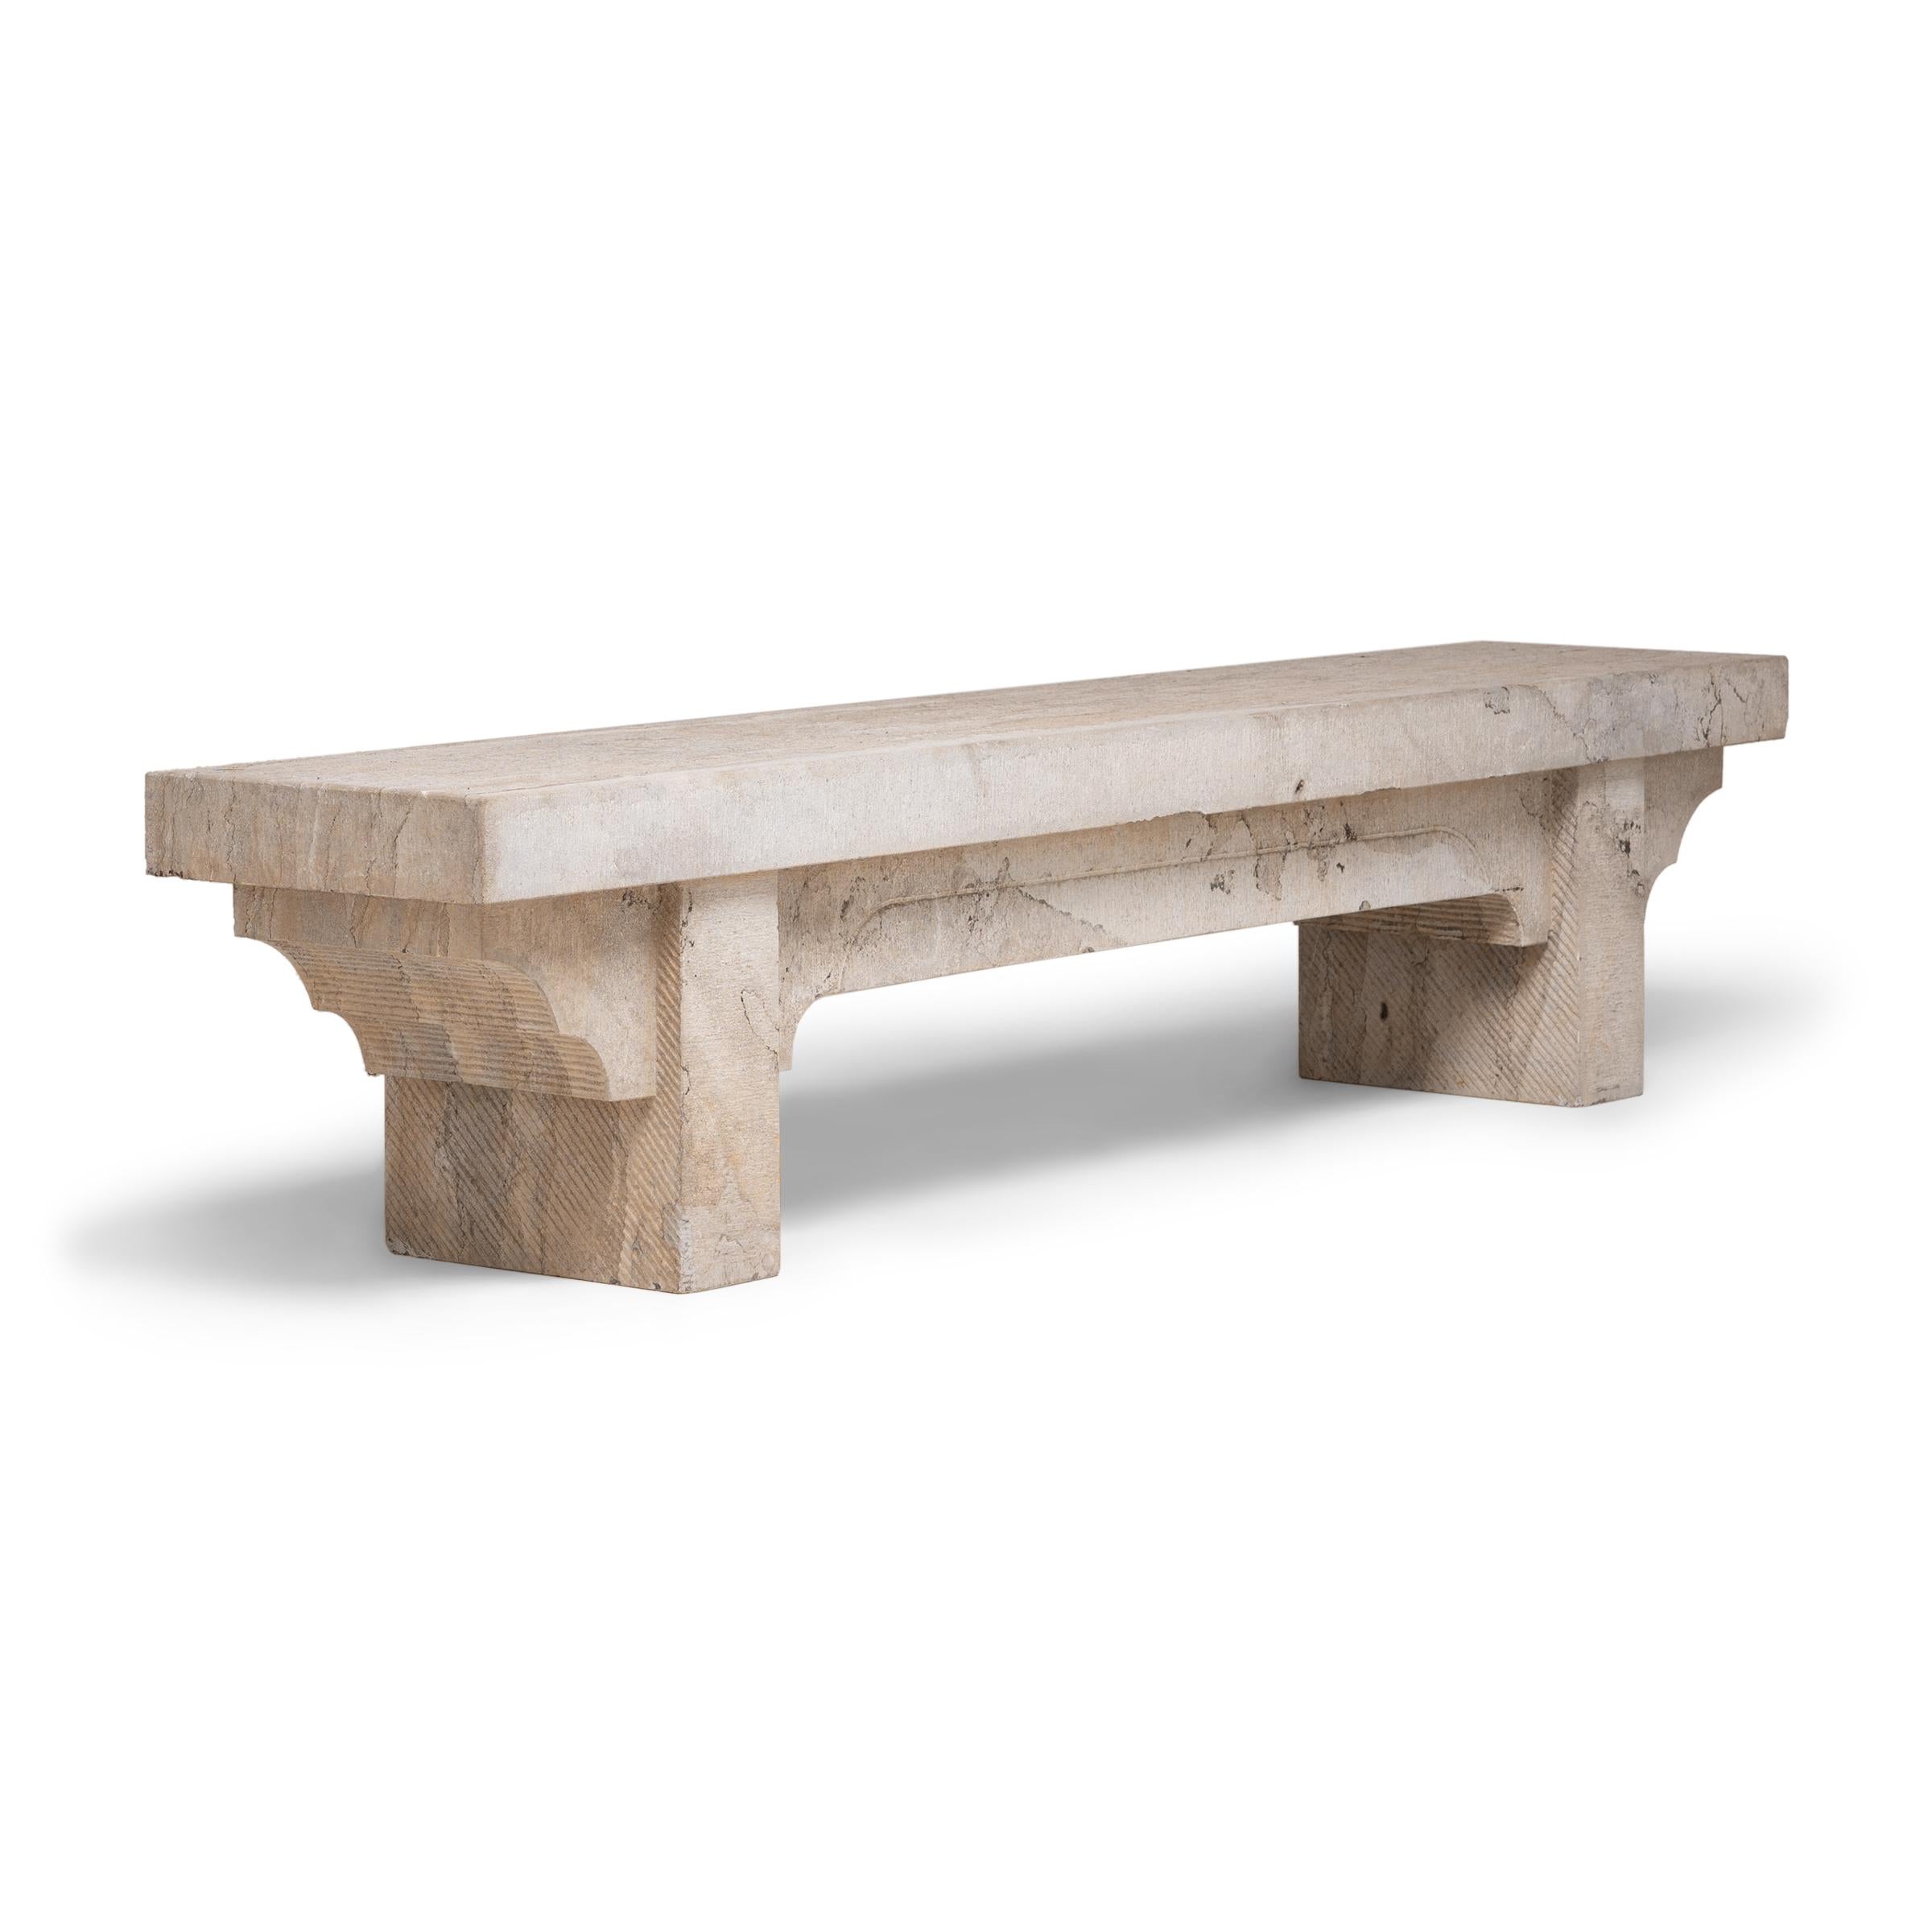 This simply designed Doon bench from China's Shanxi province was hand-crafted from a single block of limestone. With a strong, low profile and subtle stepped spandrels, the bench honors the balanced proportions and minimal forms characteristic of